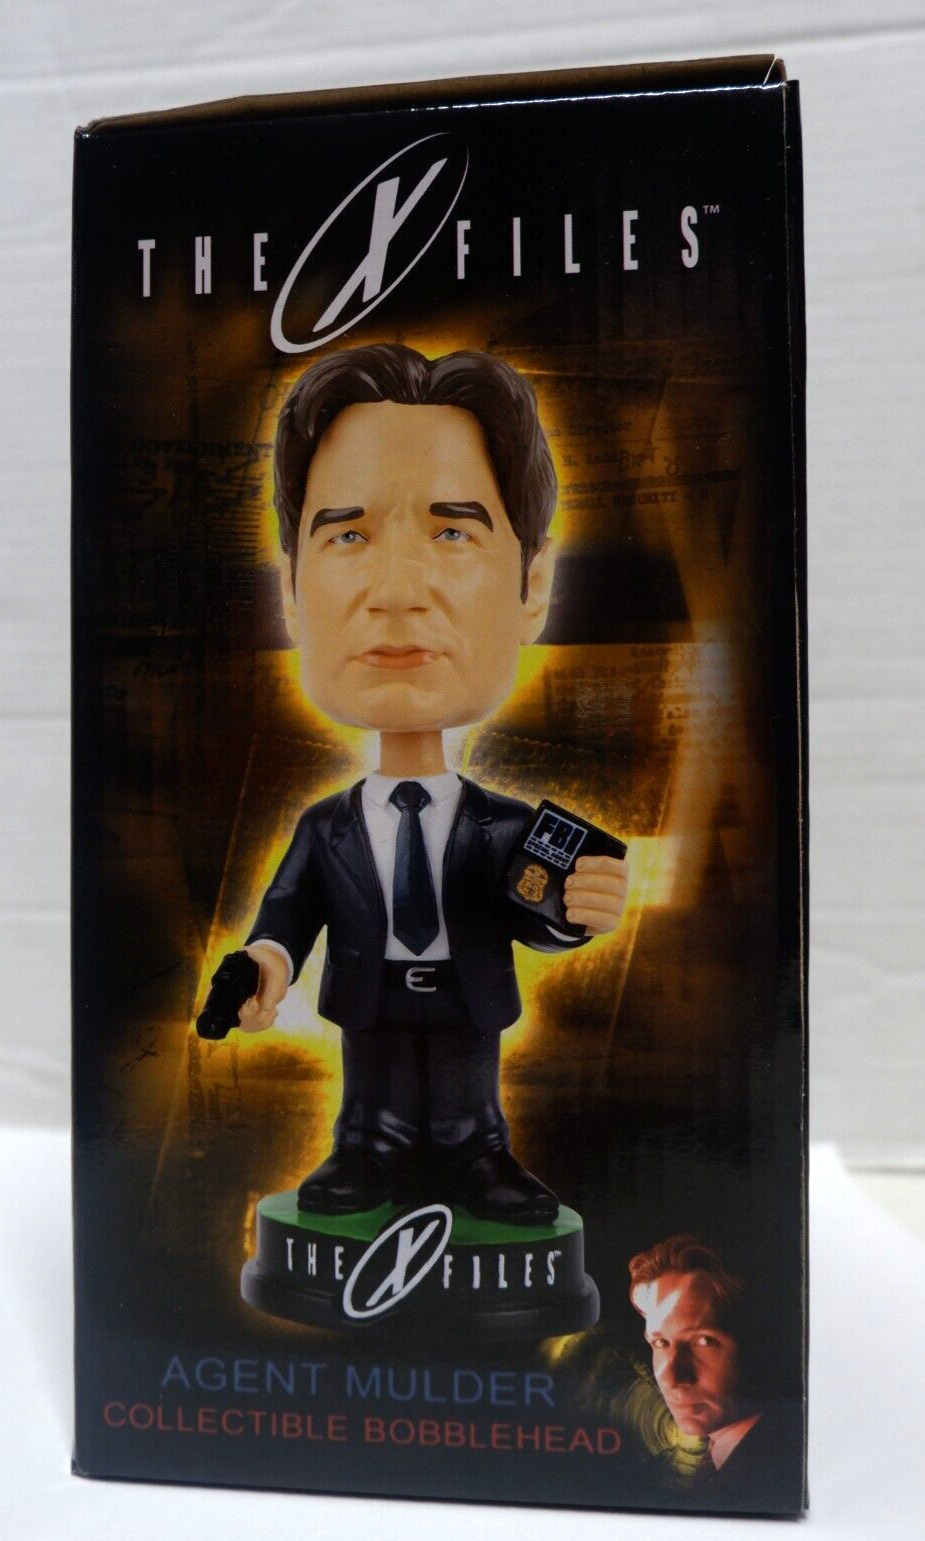 The X-Files collectible bobblehead Agent Mulder